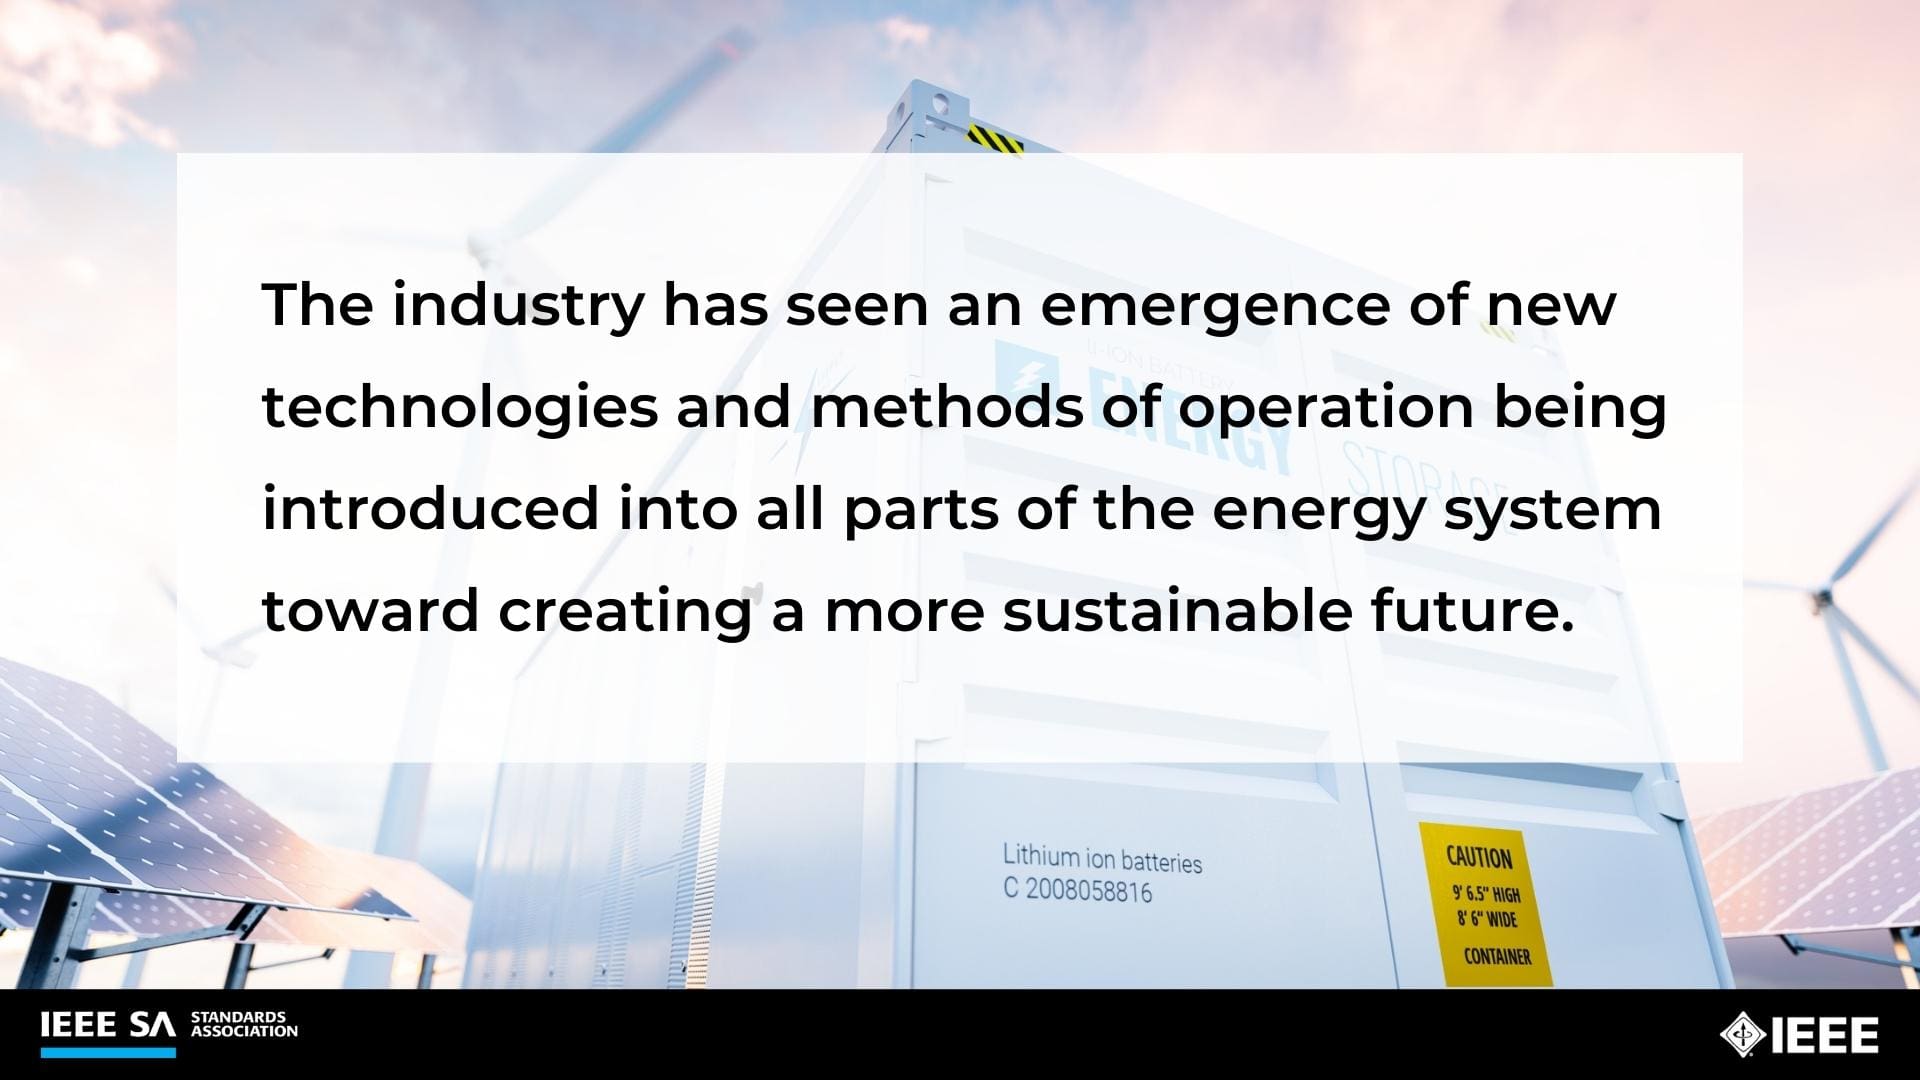 The industry has seen an emergence of new technologies and methods of operation being introduced into all parts of the energy system toward creating a more sustainable future.